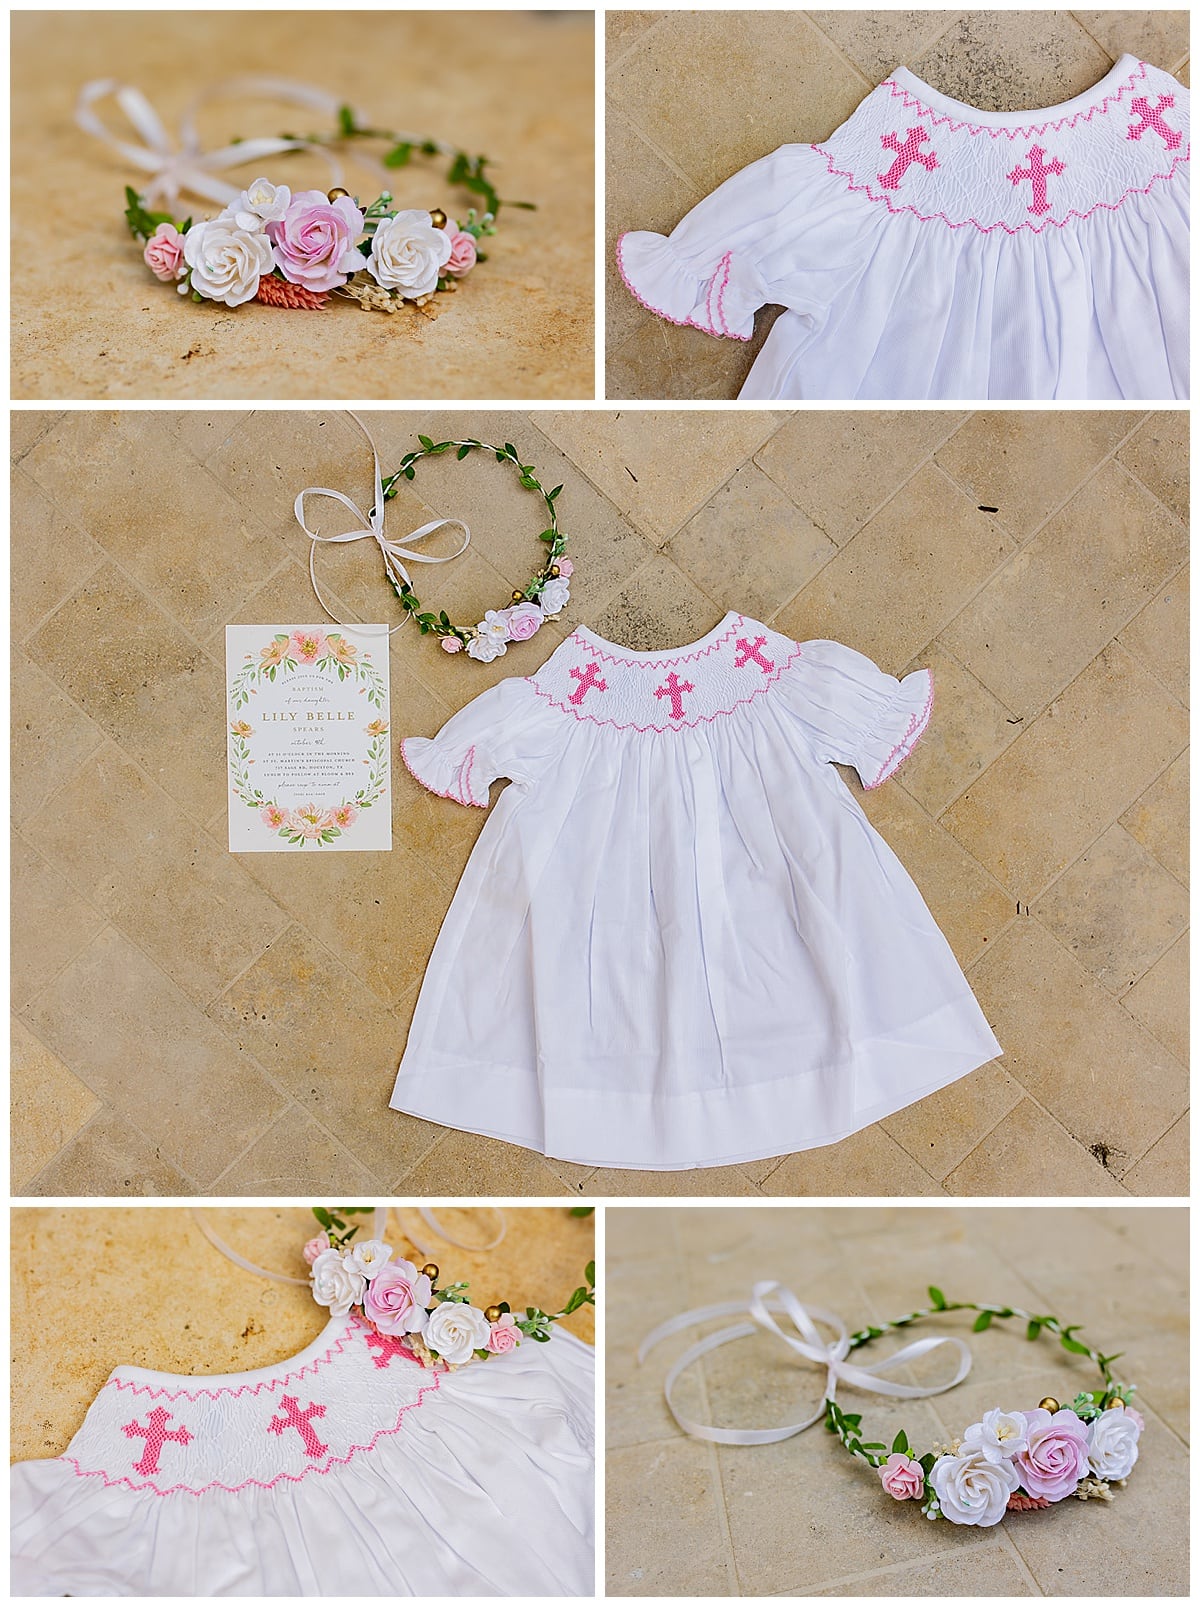 Flower crown, smocked dress with cross design, and invitation